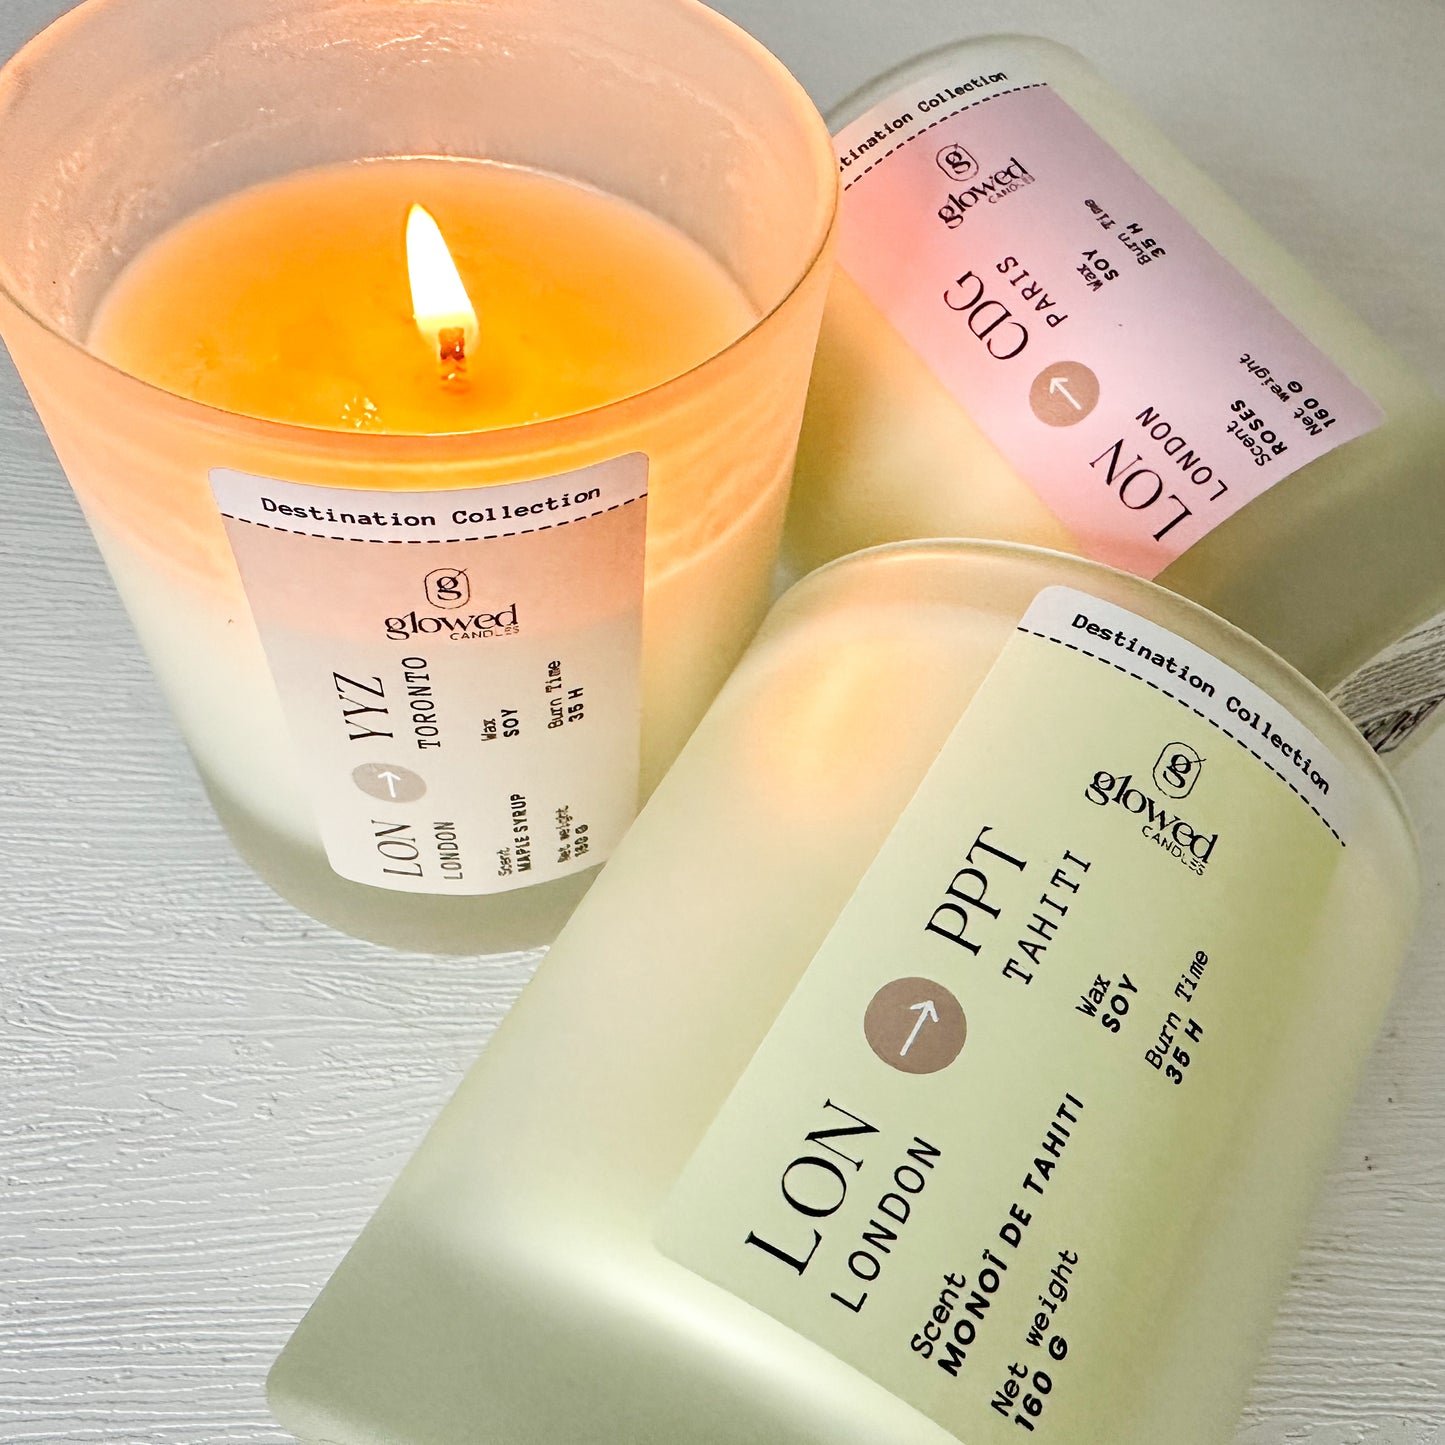 The Destination Collection - City-Inspired Scented Candles